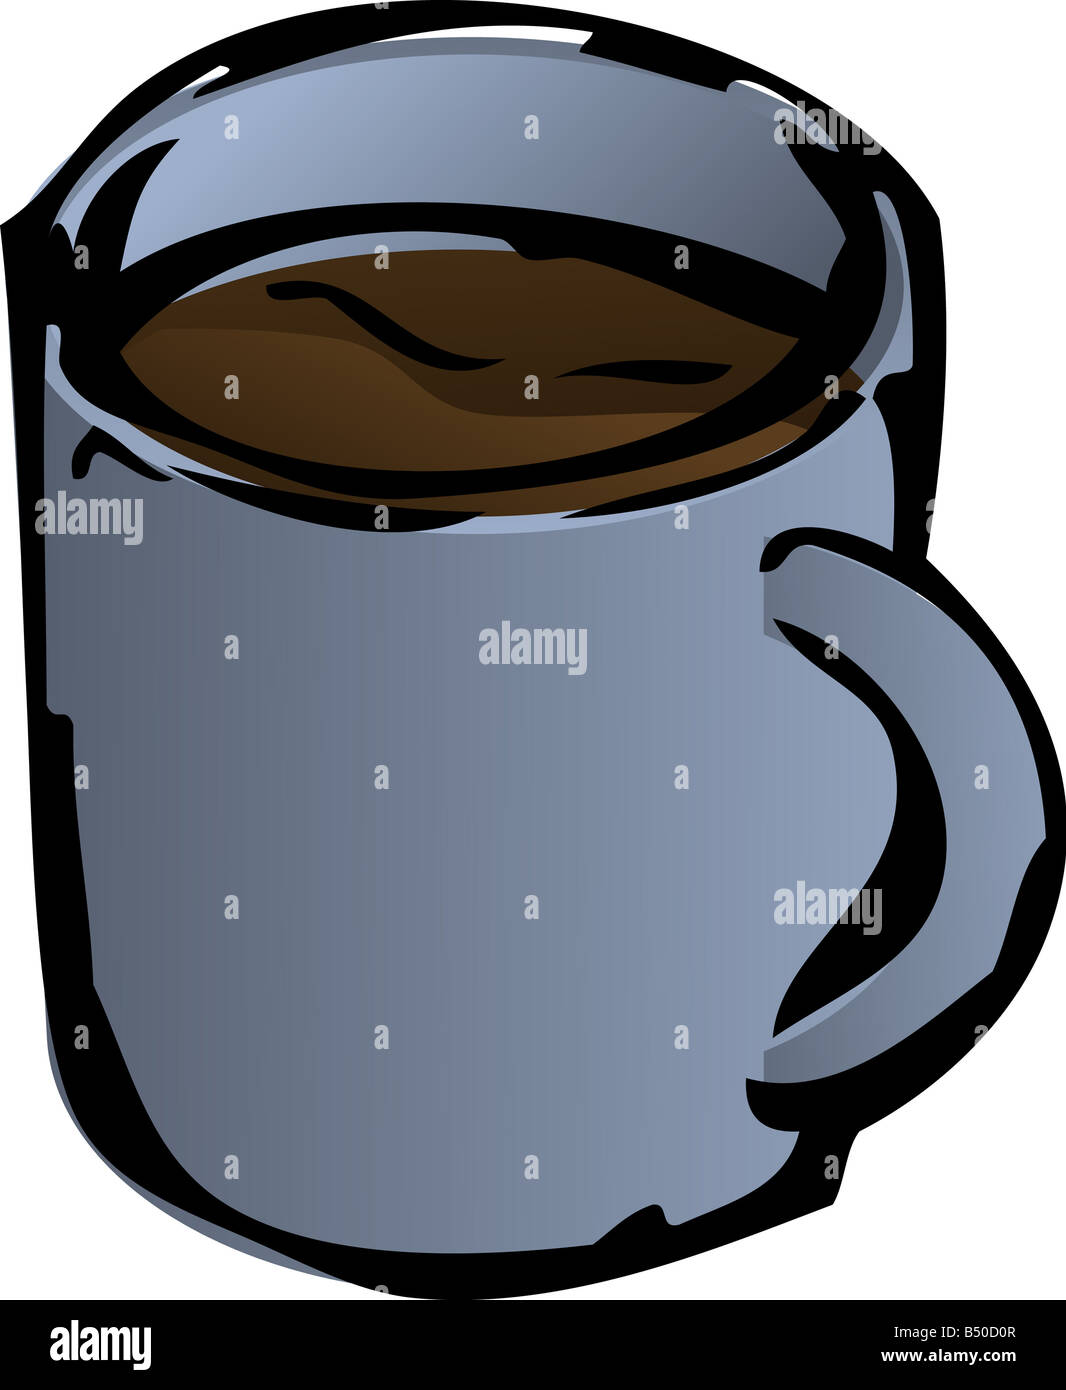 Isometric Coffee Cup Stock Illustrations  9910 Isometric Coffee Cup Stock  Illustrations Vectors  Clipart  Dreamstime